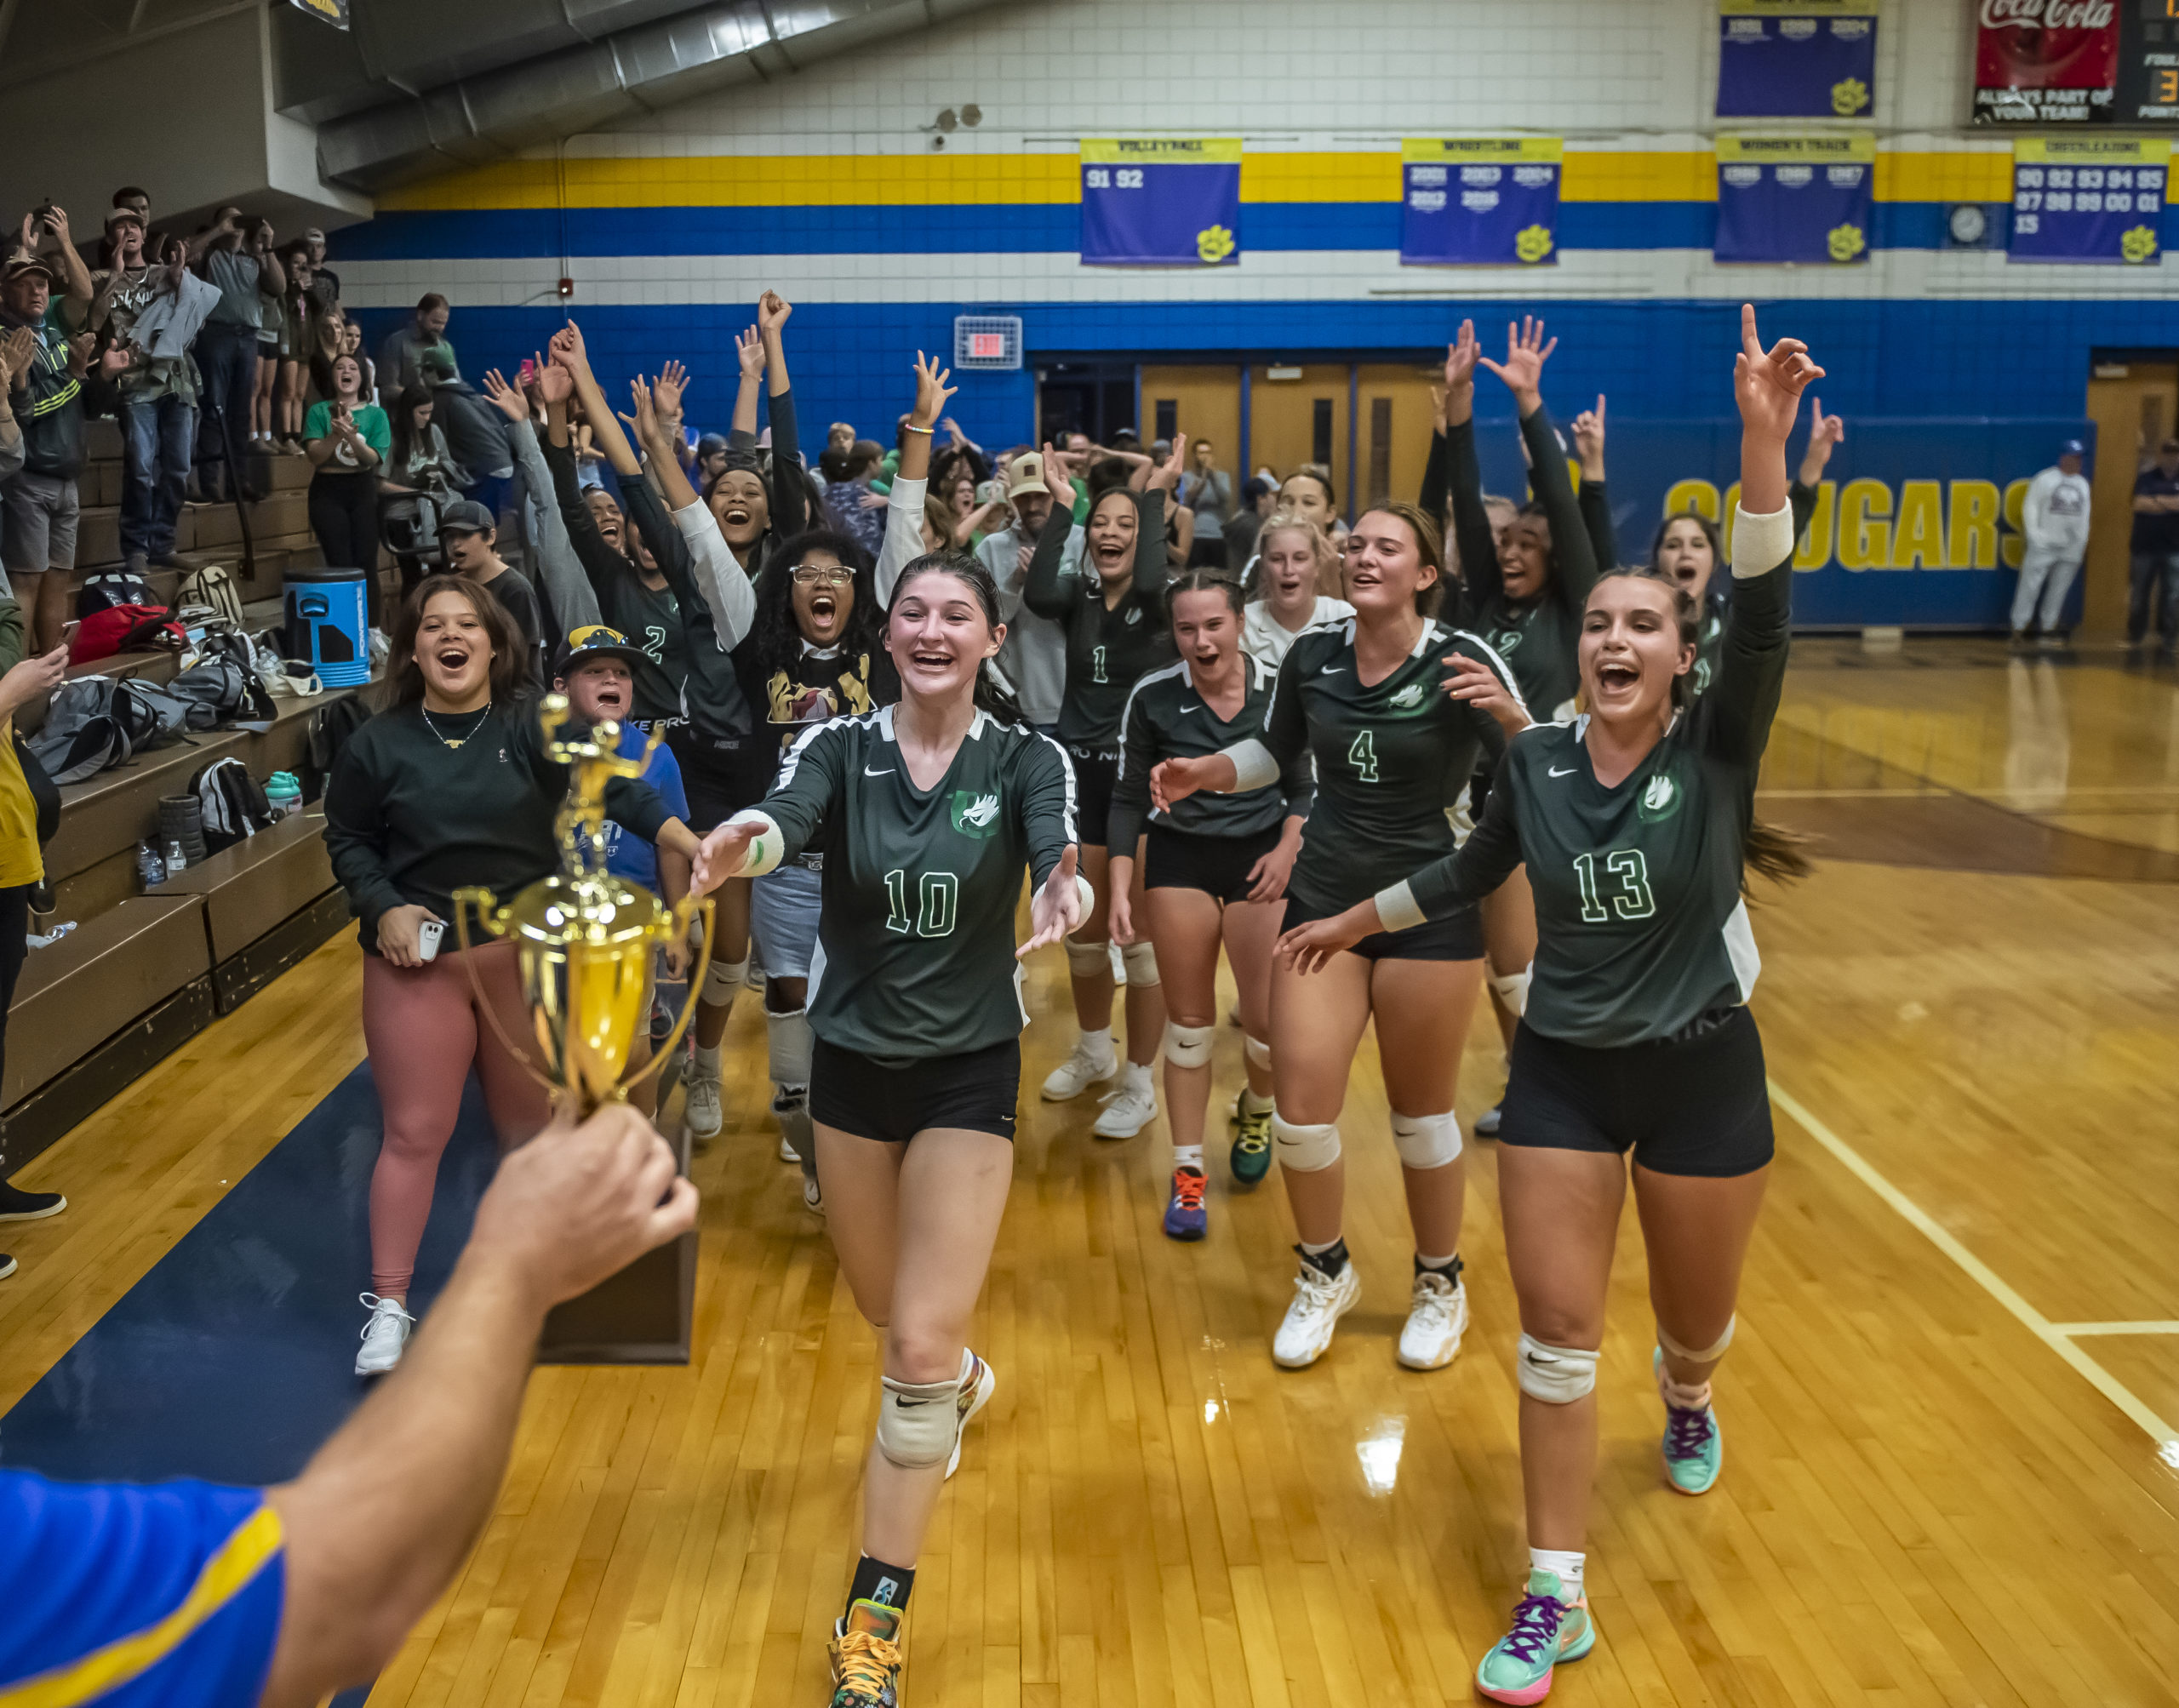 PREP ROUNDUP: UCA wins PAC Tournament in volleyball; Providence Grove runners claim titles